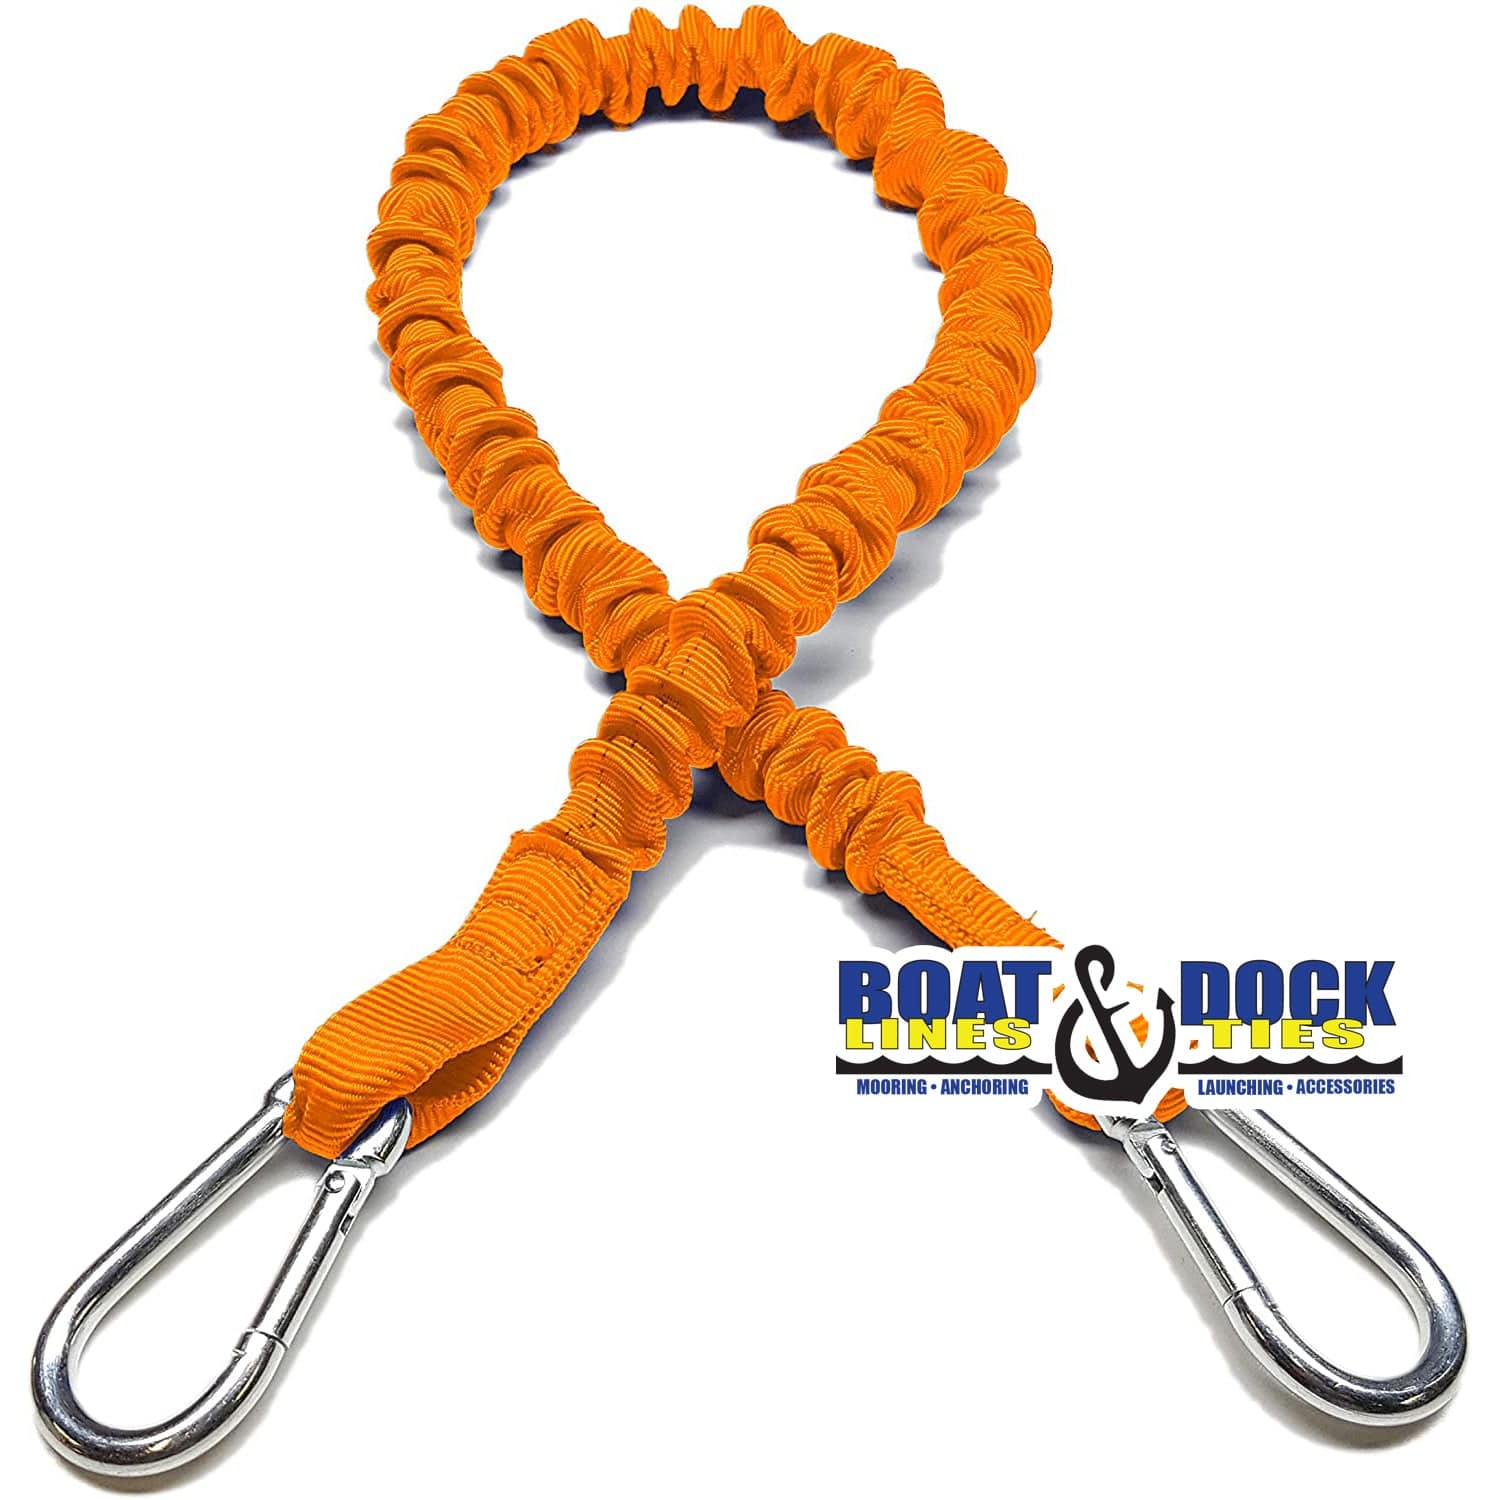 Boat Dock Tie Bungee Cords, 2 Hooked Ends, UV Protected Bungee Cords - Set of 2 - Made in USA - Boat Lines & Dock Ties Boat Lines & Dock Ties 36" / Orange